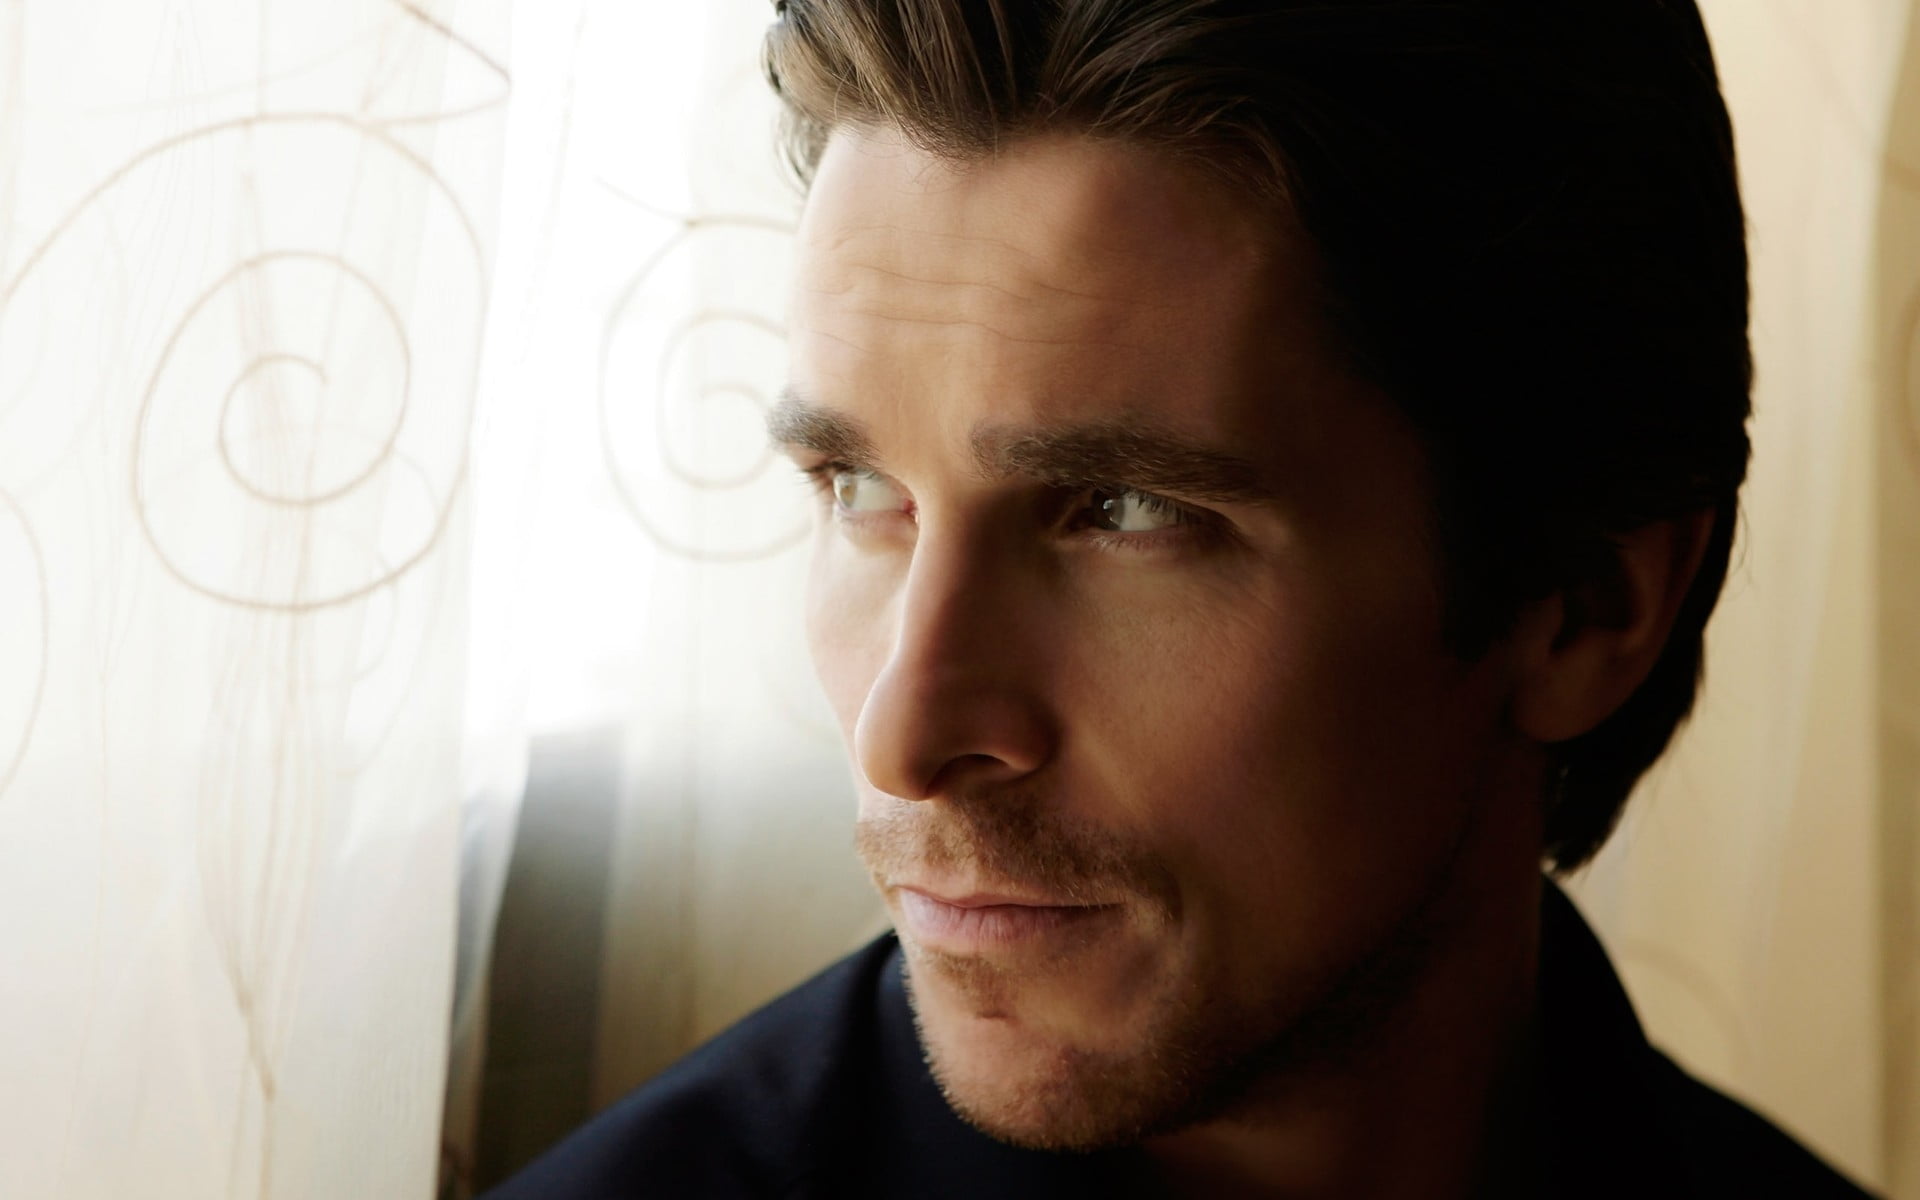 Poster of Christian Bale Actor, Christian Bale Posters for Room Wall  Decortation, Size - 12 X 18 inches | EB ART 5220 : Amazon.in: Home & Kitchen